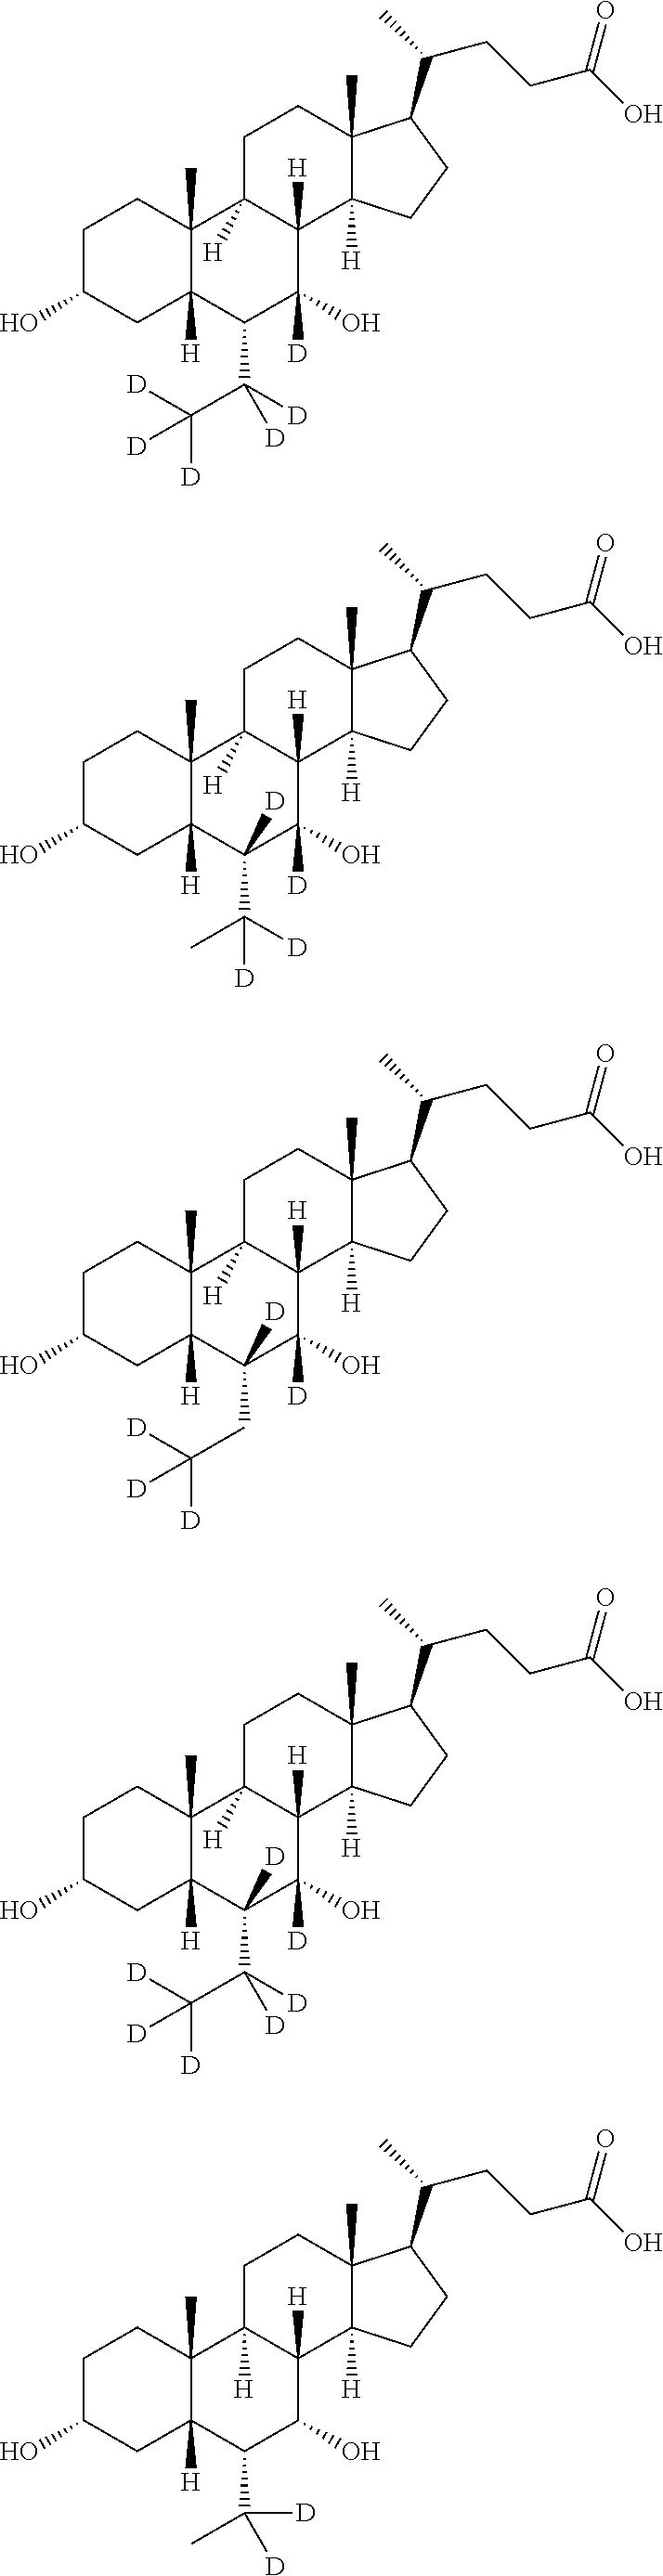 Deuterated chenodeoxycholic acid derivative and pharmaceutical composition comprising compound thereof